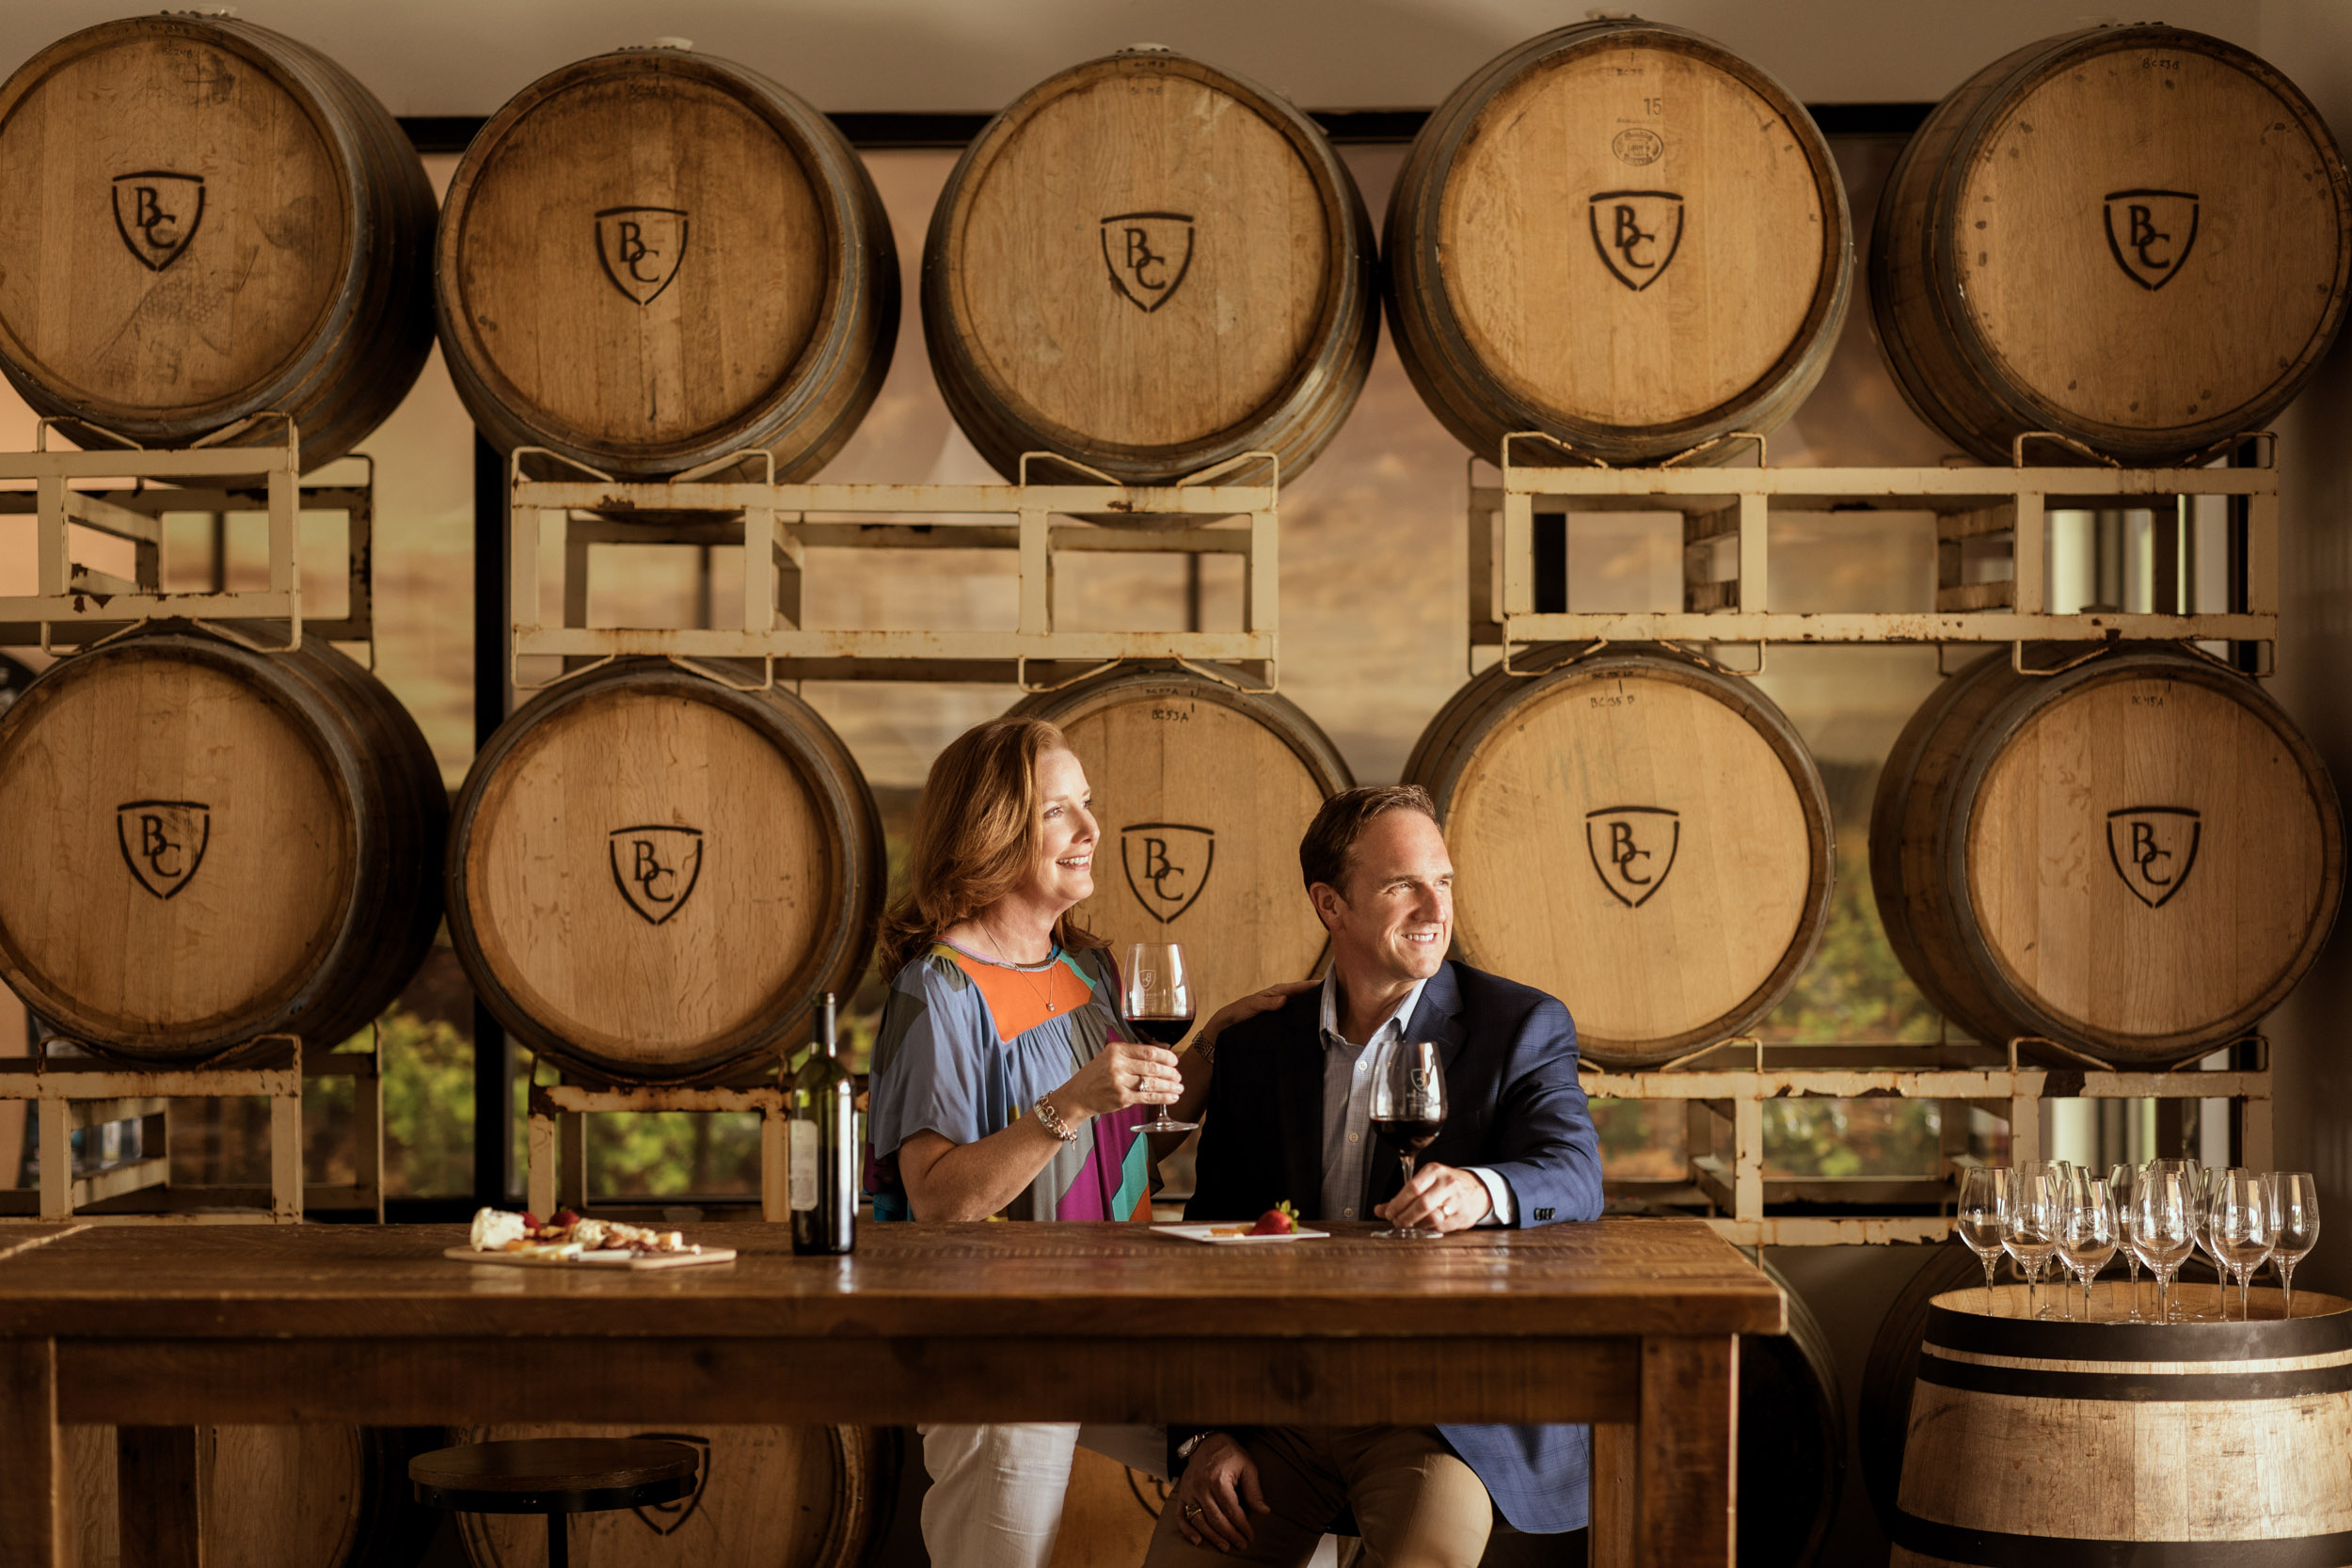 woman and man drinking wine in tasting room at winery with wine barrels